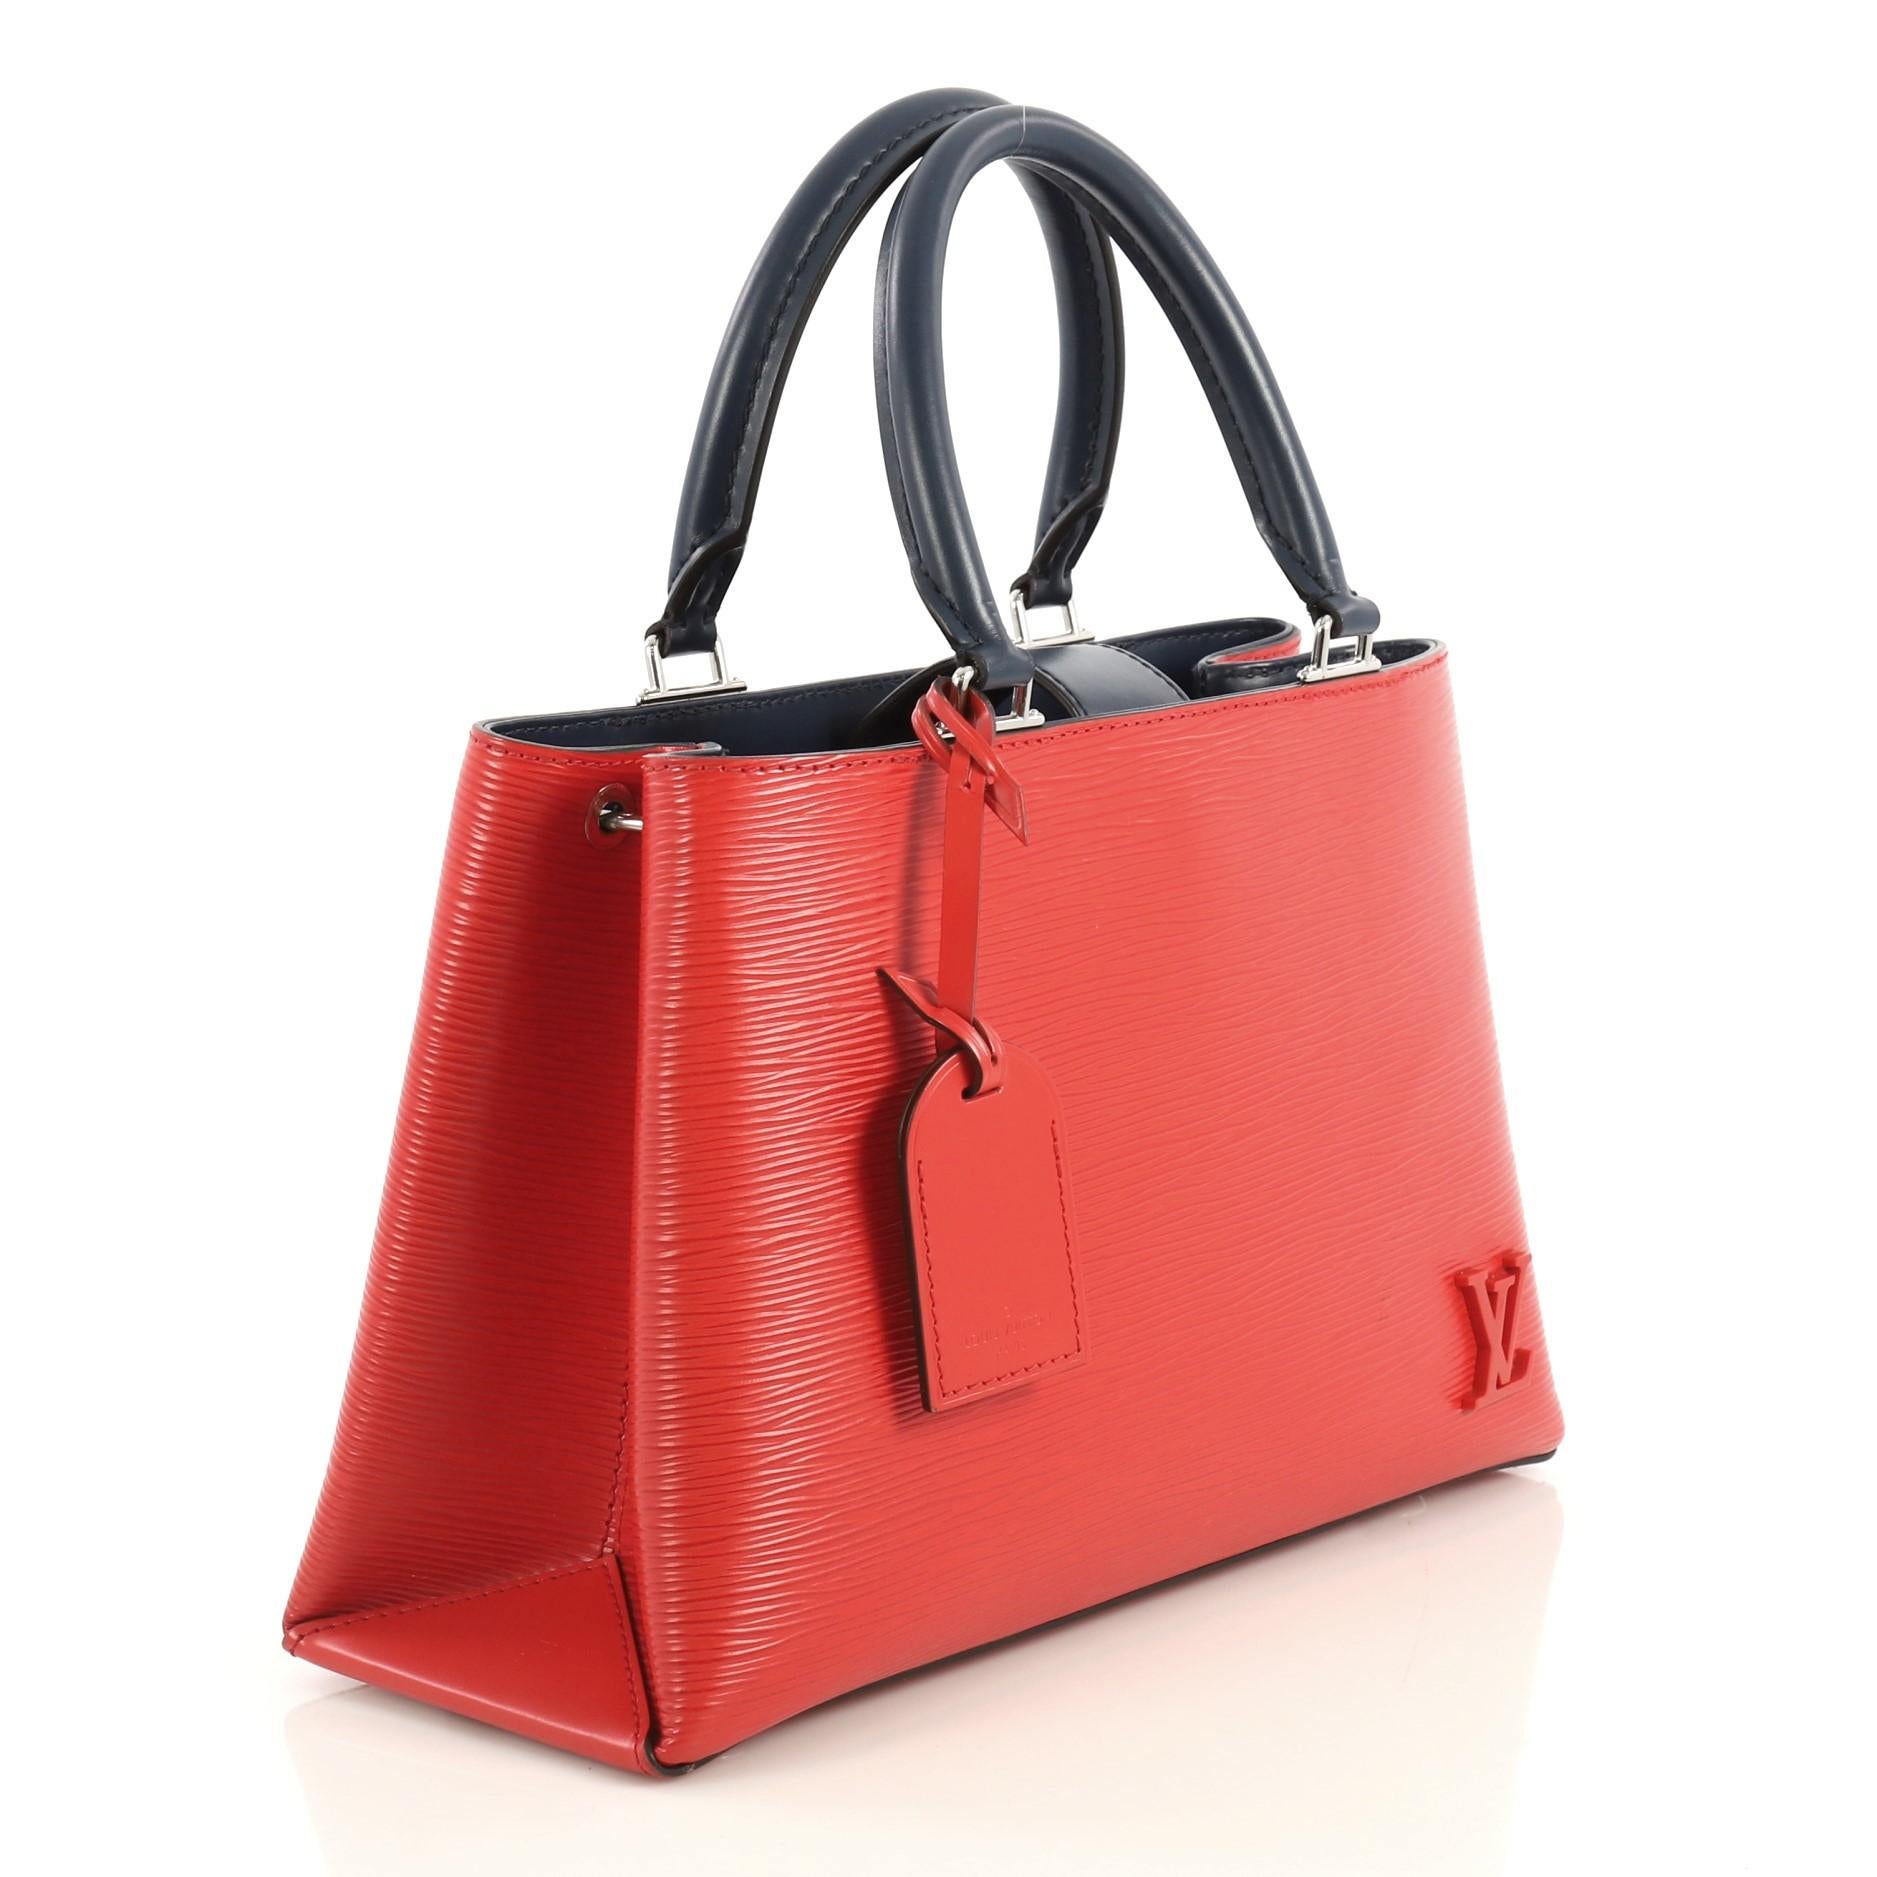 This Louis Vuitton Kleber Handbag Epi Leather PM, crafted in red epi leather, features dual rolled handles, exterior back pocket, and silver-tone hardware. Its magnetic snap closure opens to a black microfiber interior divided into two compartments